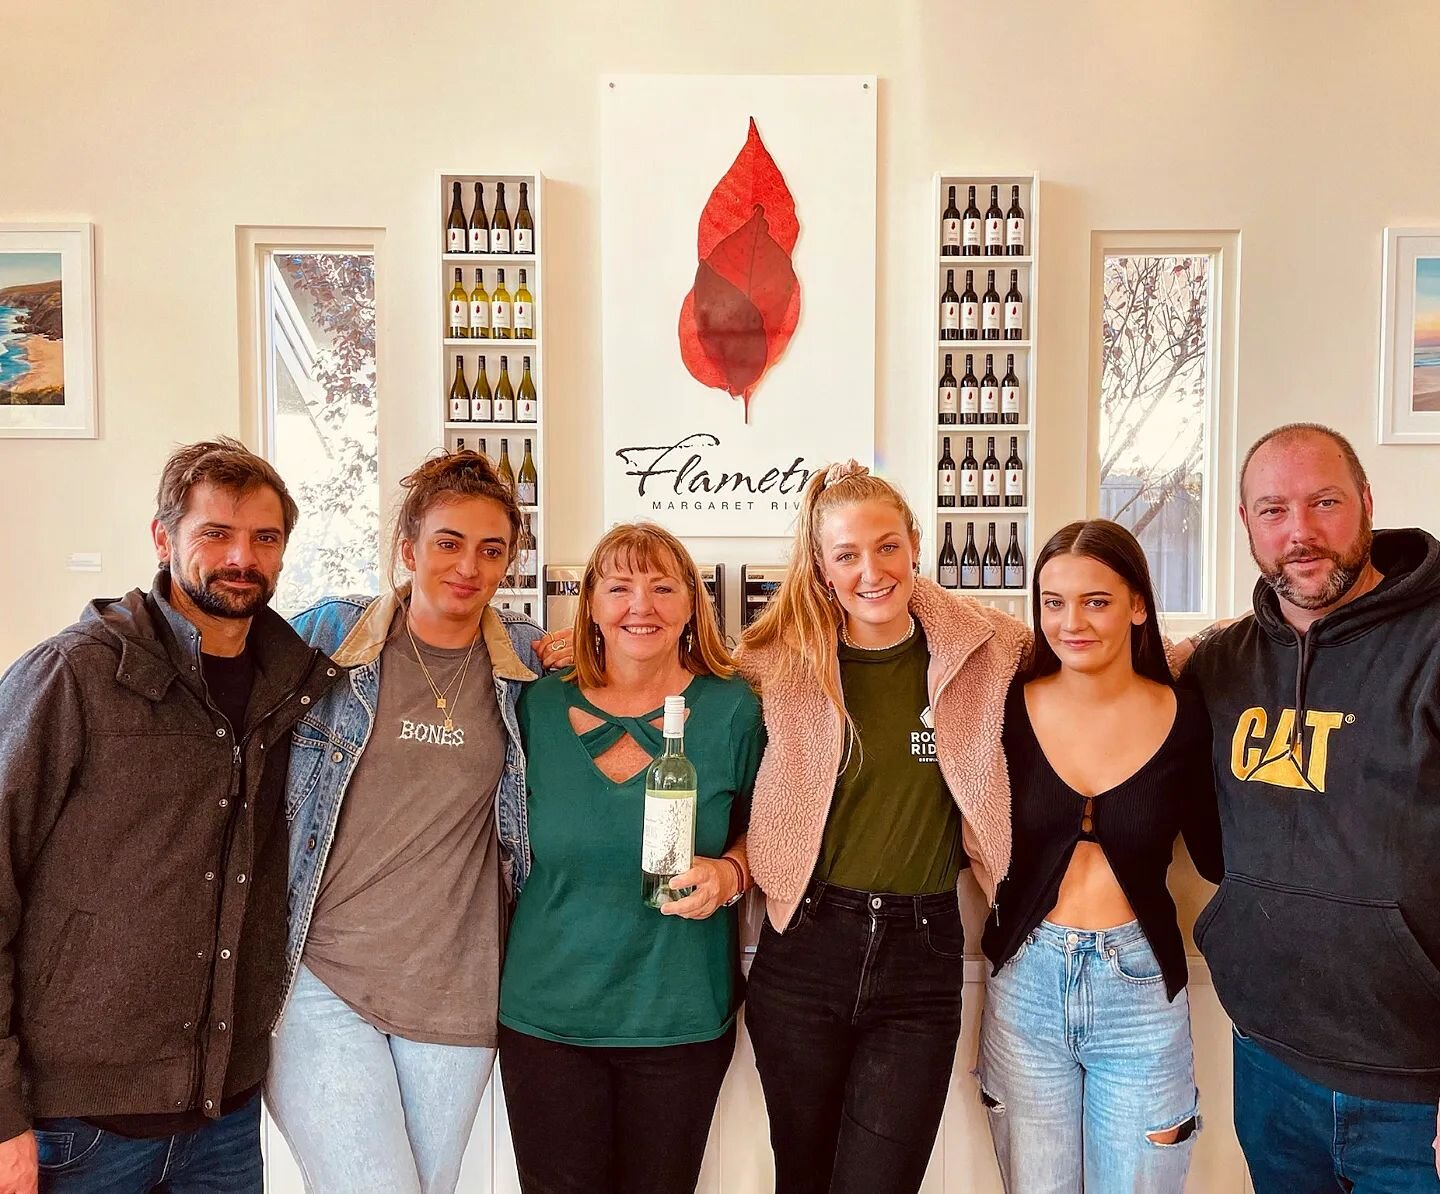 Team Tonic on tour! We went to visit our good friends @flametreewines yesterday to taste through their incredible range of wines. 
.
.
.
#tonicontour #wine #winetraining #drink #learnwine #margaretriverregion
#Chardonnay #cabernet #drinkgoodwine